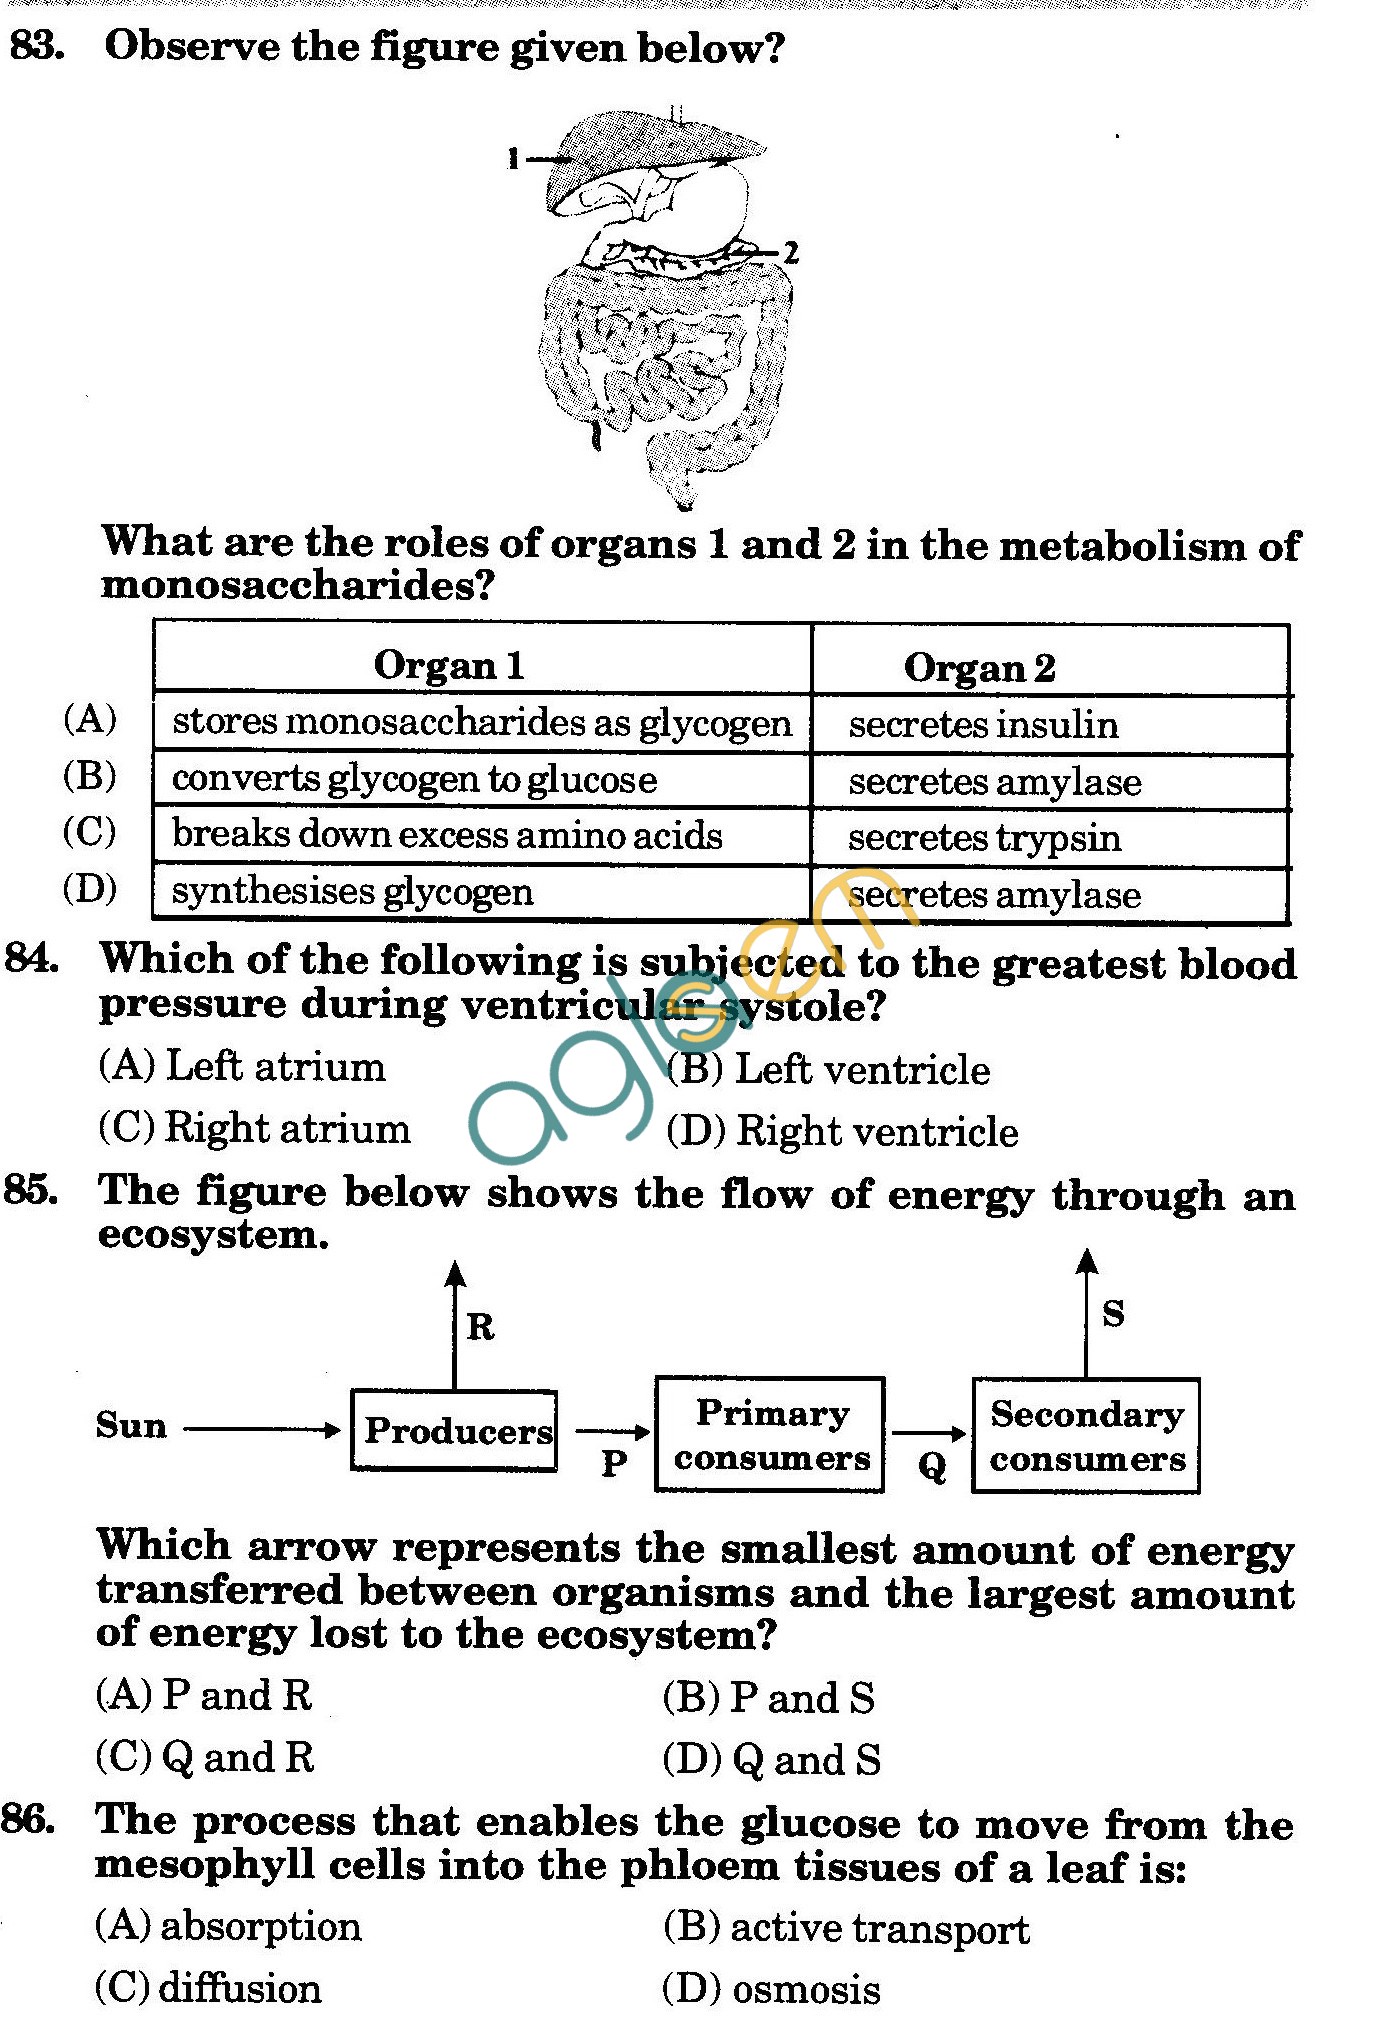 NSTSE 2010: Class X Question Paper with Answers - Biology